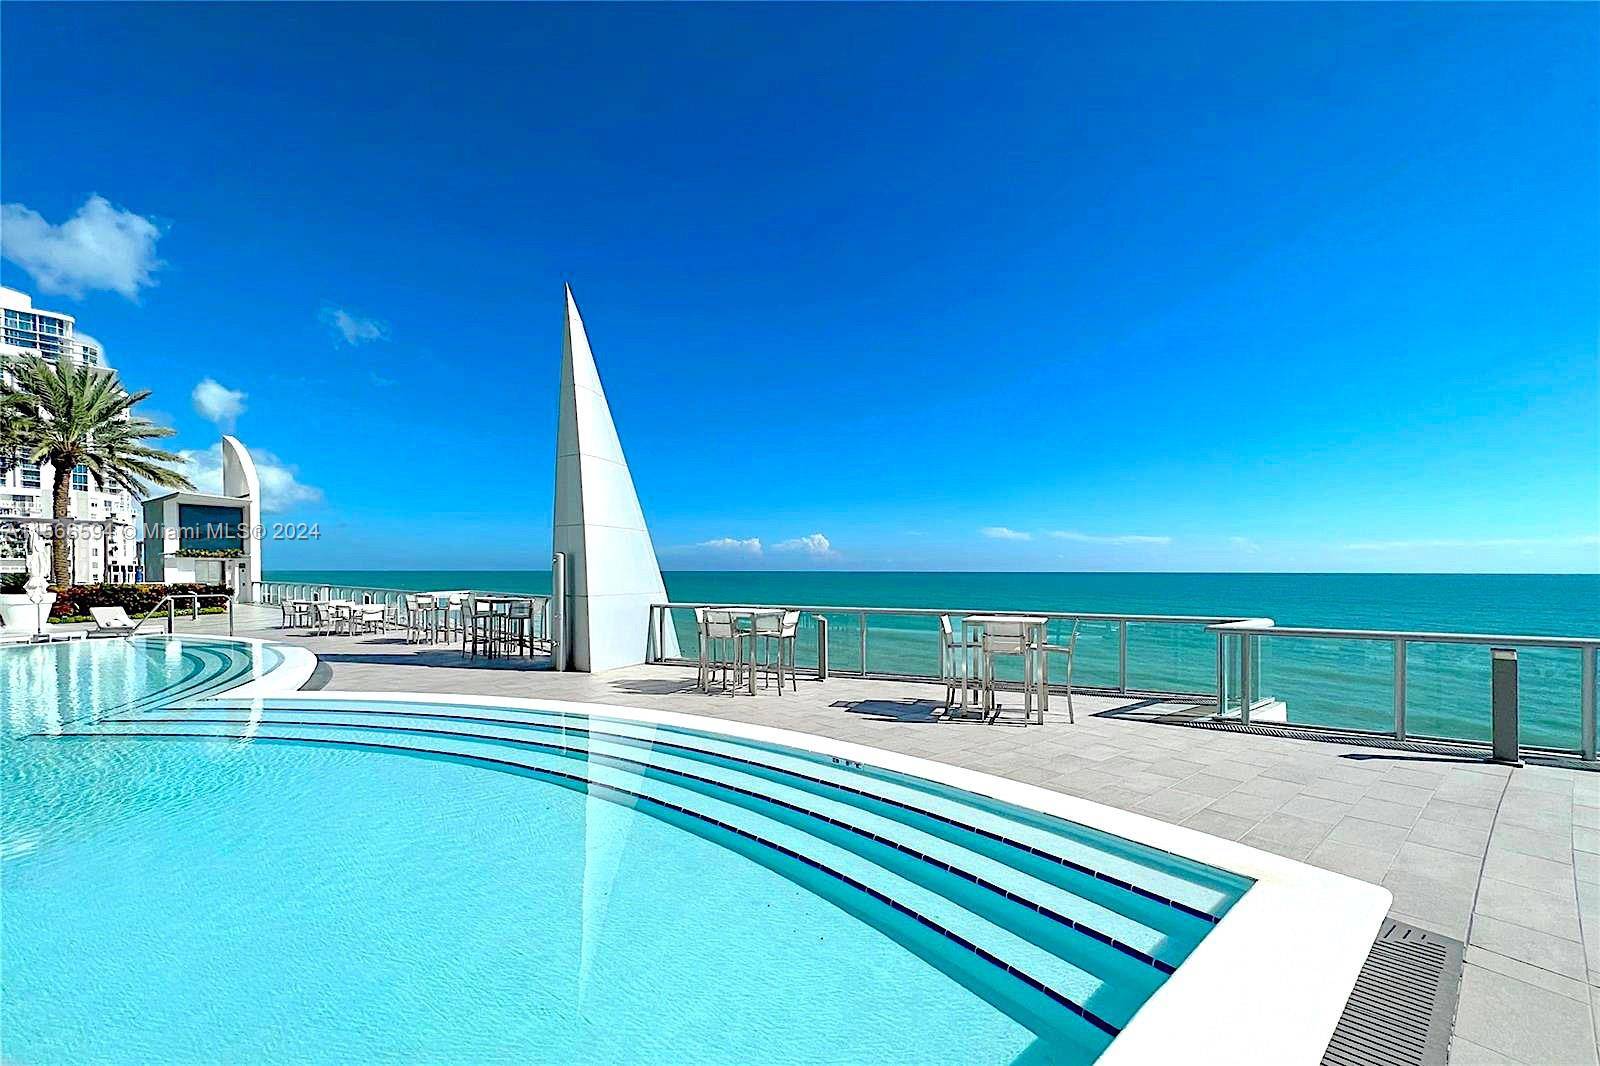 Rarely do you find a corner 4 bedroom apartment available for rent at the prestigious Jade Ocean, offering the ultimate oceanfront Miami lifestyle.